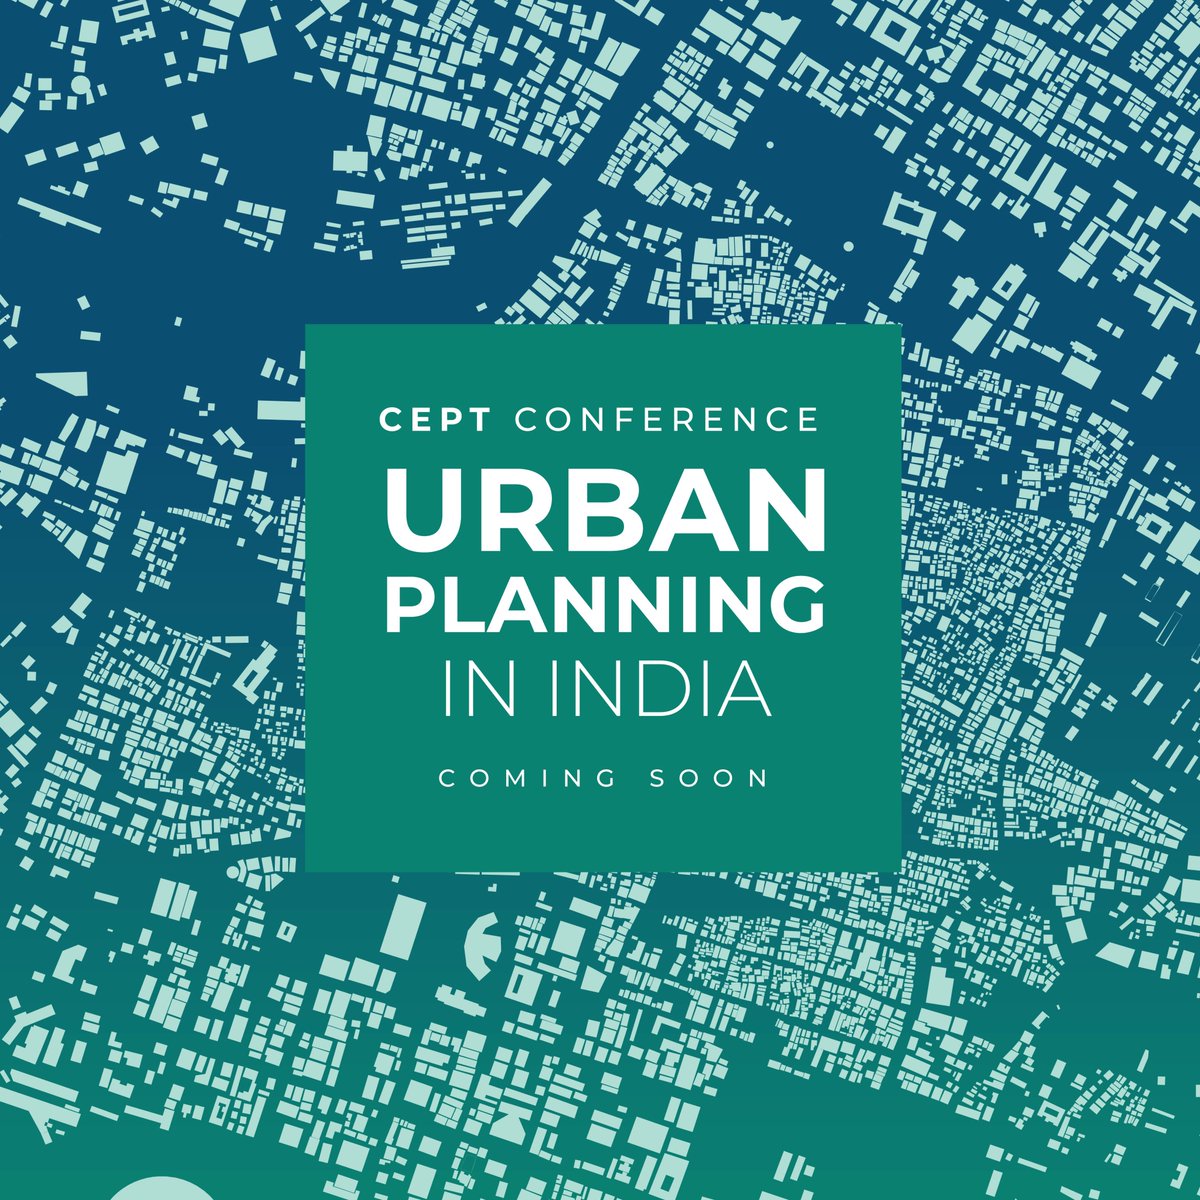 𝗪𝗲'𝗿𝗲 𝗕𝗮𝗰𝗸... #UrbanPlanningInIndia, a #CEPTConference brought to you by @CeptResearch in collaboration with @fpcept, @CEPTUniversity1. Stay tuned for more updates! #UrbanPlanningInIndia #CEPTConference #CRDF